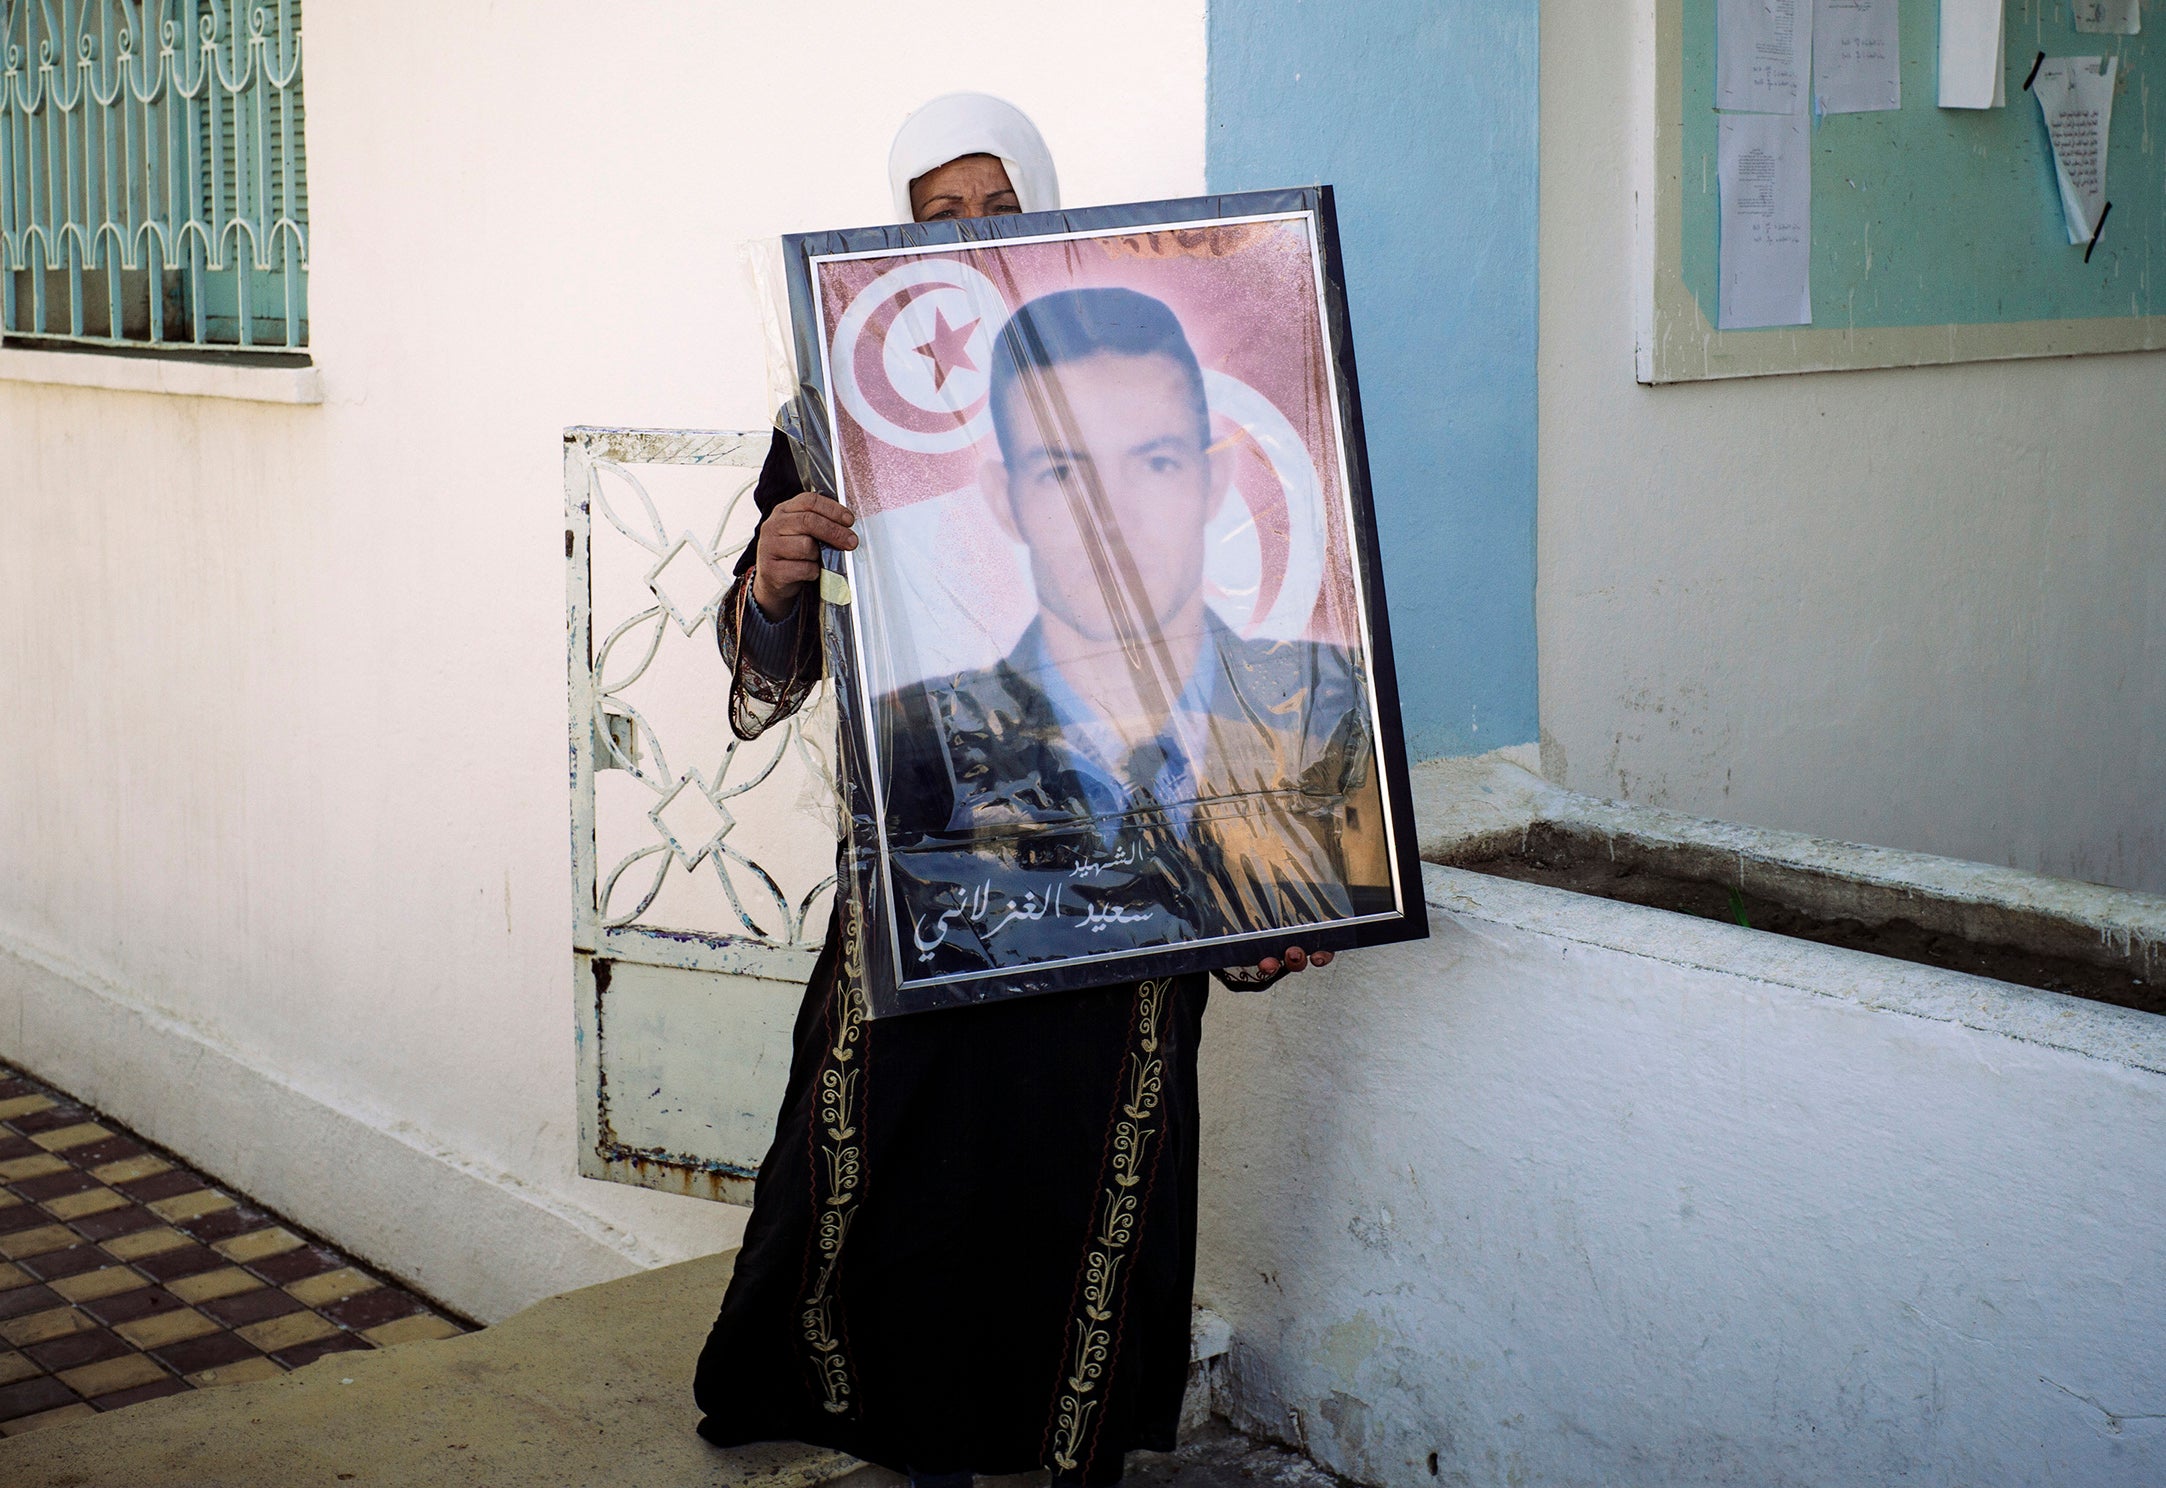 Fadha Ghozlani shows a portrait of her brother Sayed, who was murdered by Isis militants in the family home. Among Sayed's killers was a cousin